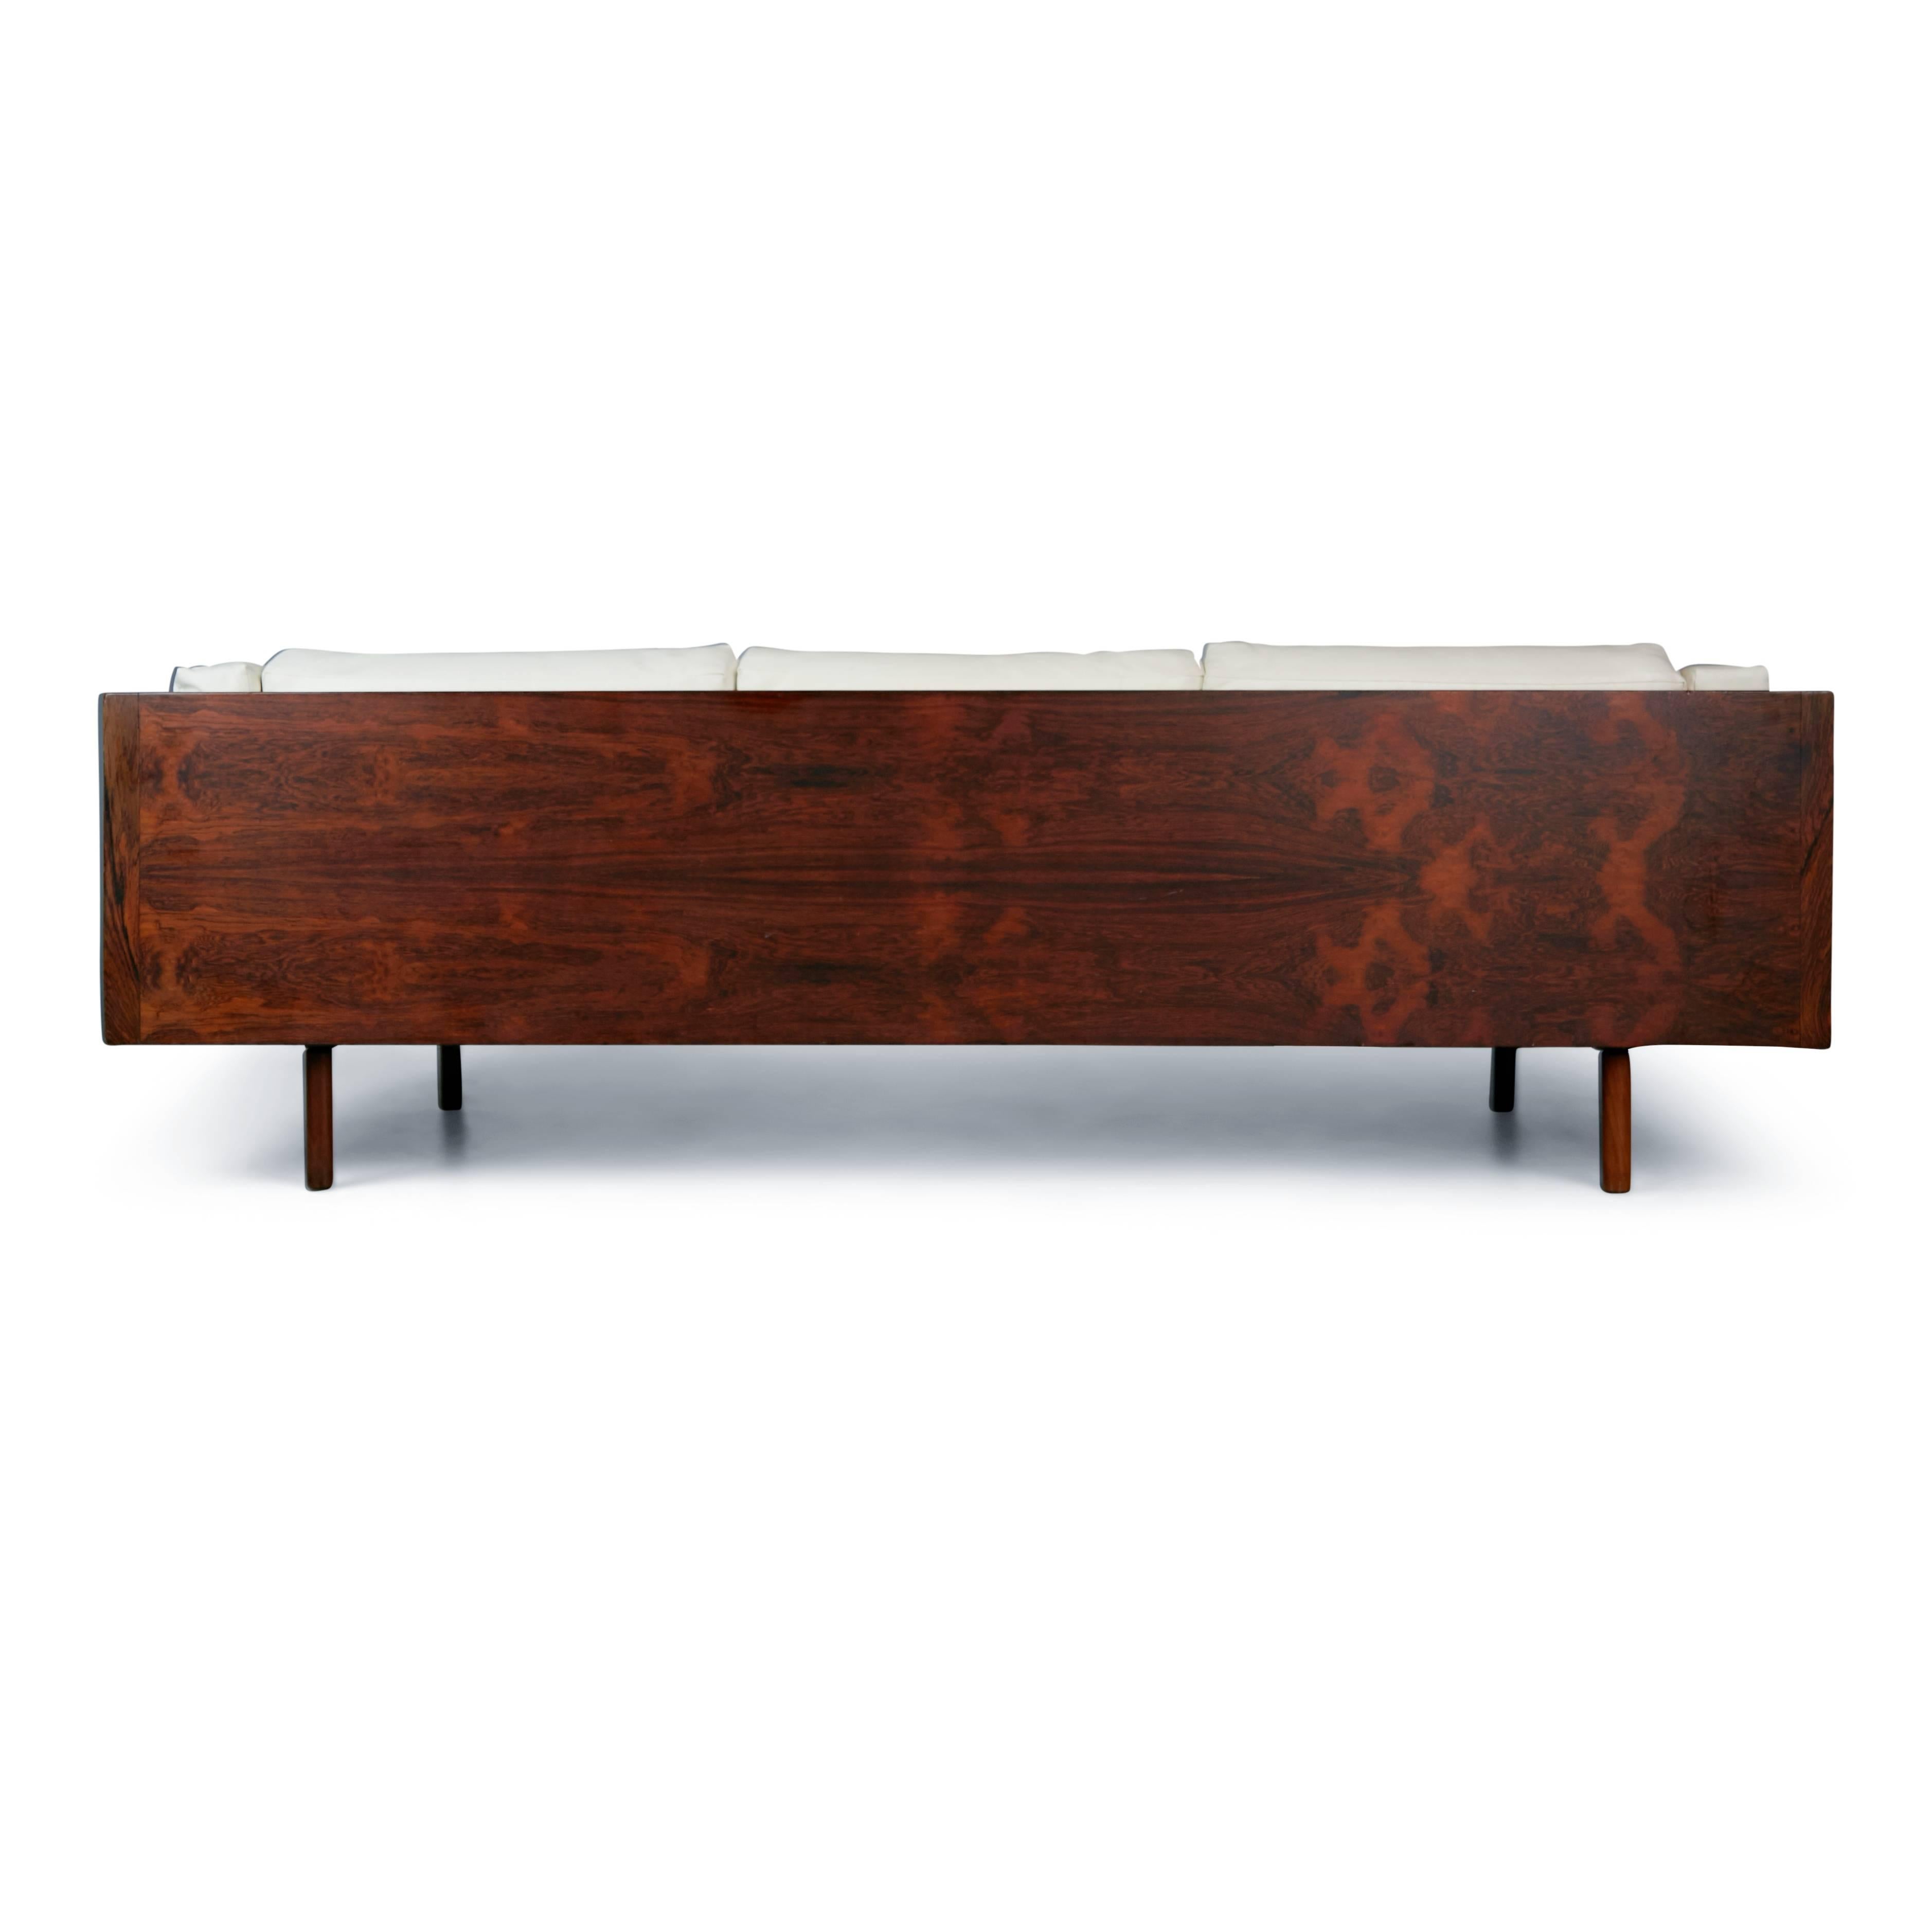 Mid-Century Modern Rosewood and Leather Case Sofa by Milo Baughman for Thayer Coggin, circa 1960